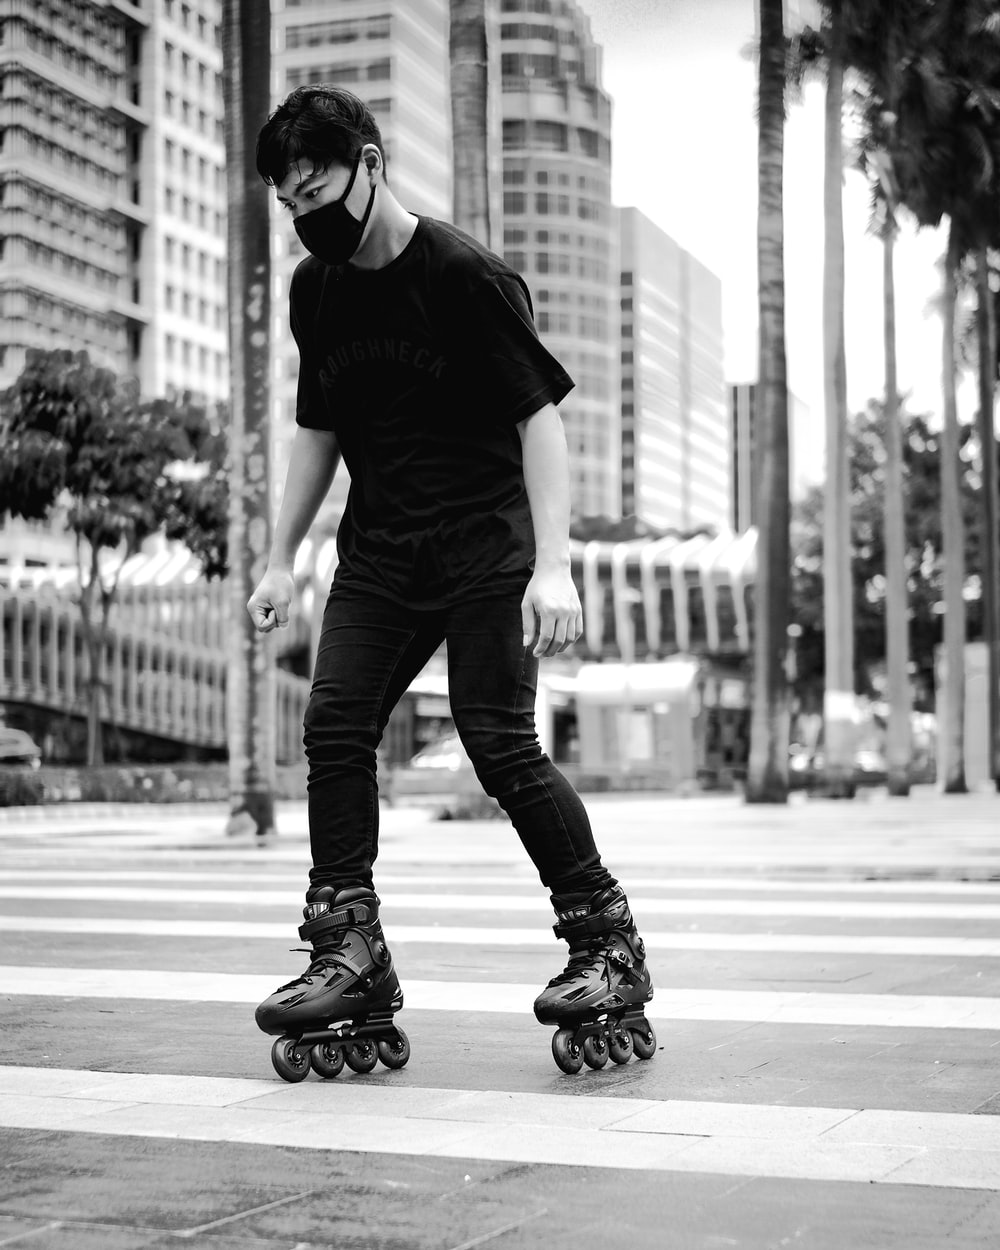 Roller Skating Picture. Download Free Image